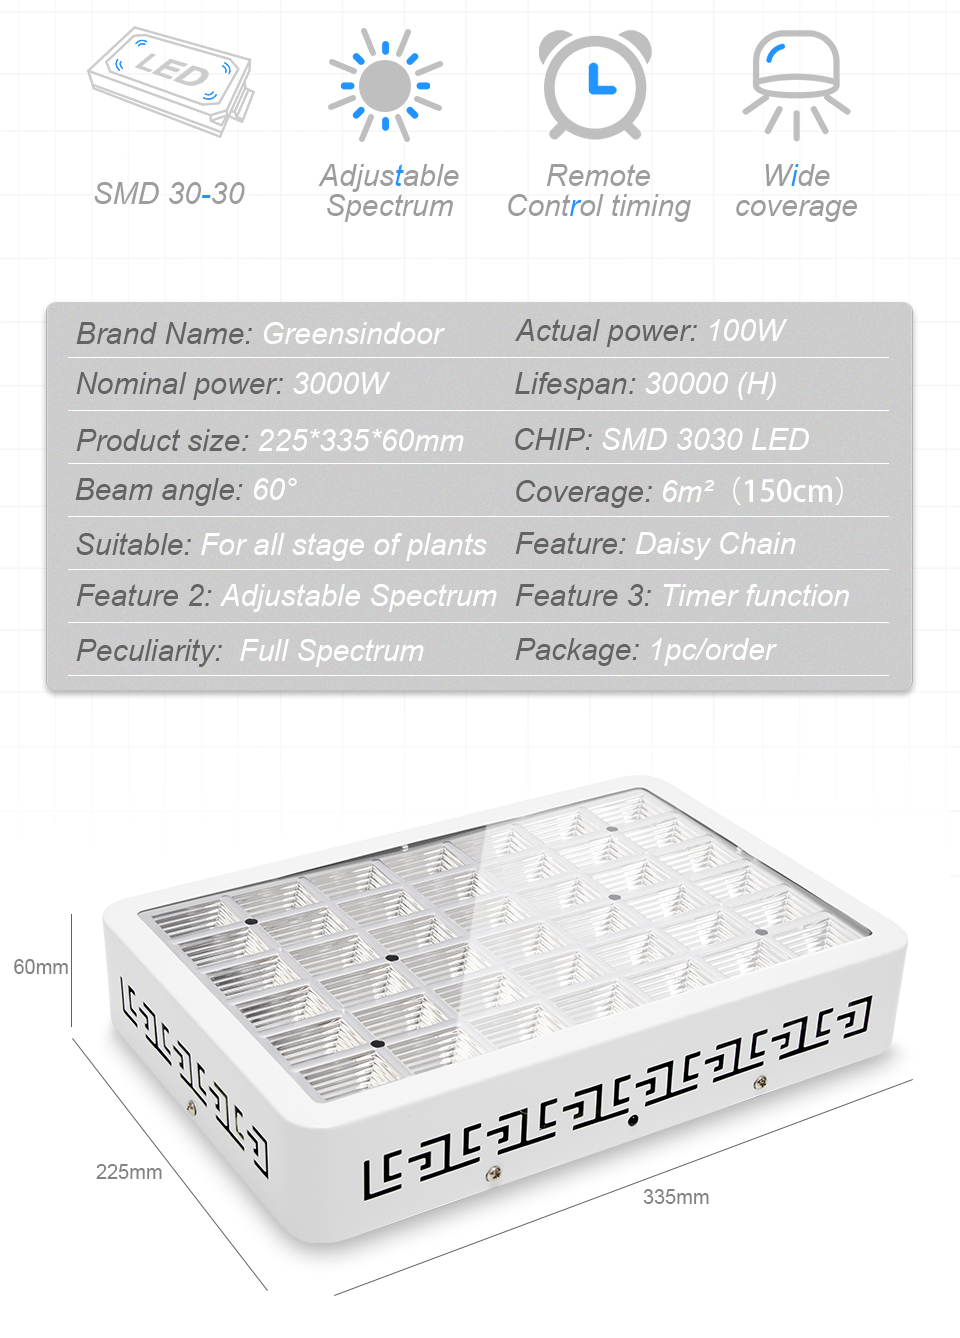 100W-In-Full-Spectrum-LED-Grow-Light-Automatic-Cycle-Timing-Lamp-Lights-Dimmable-Indoor-Led-Grow-Lig-1813913-2